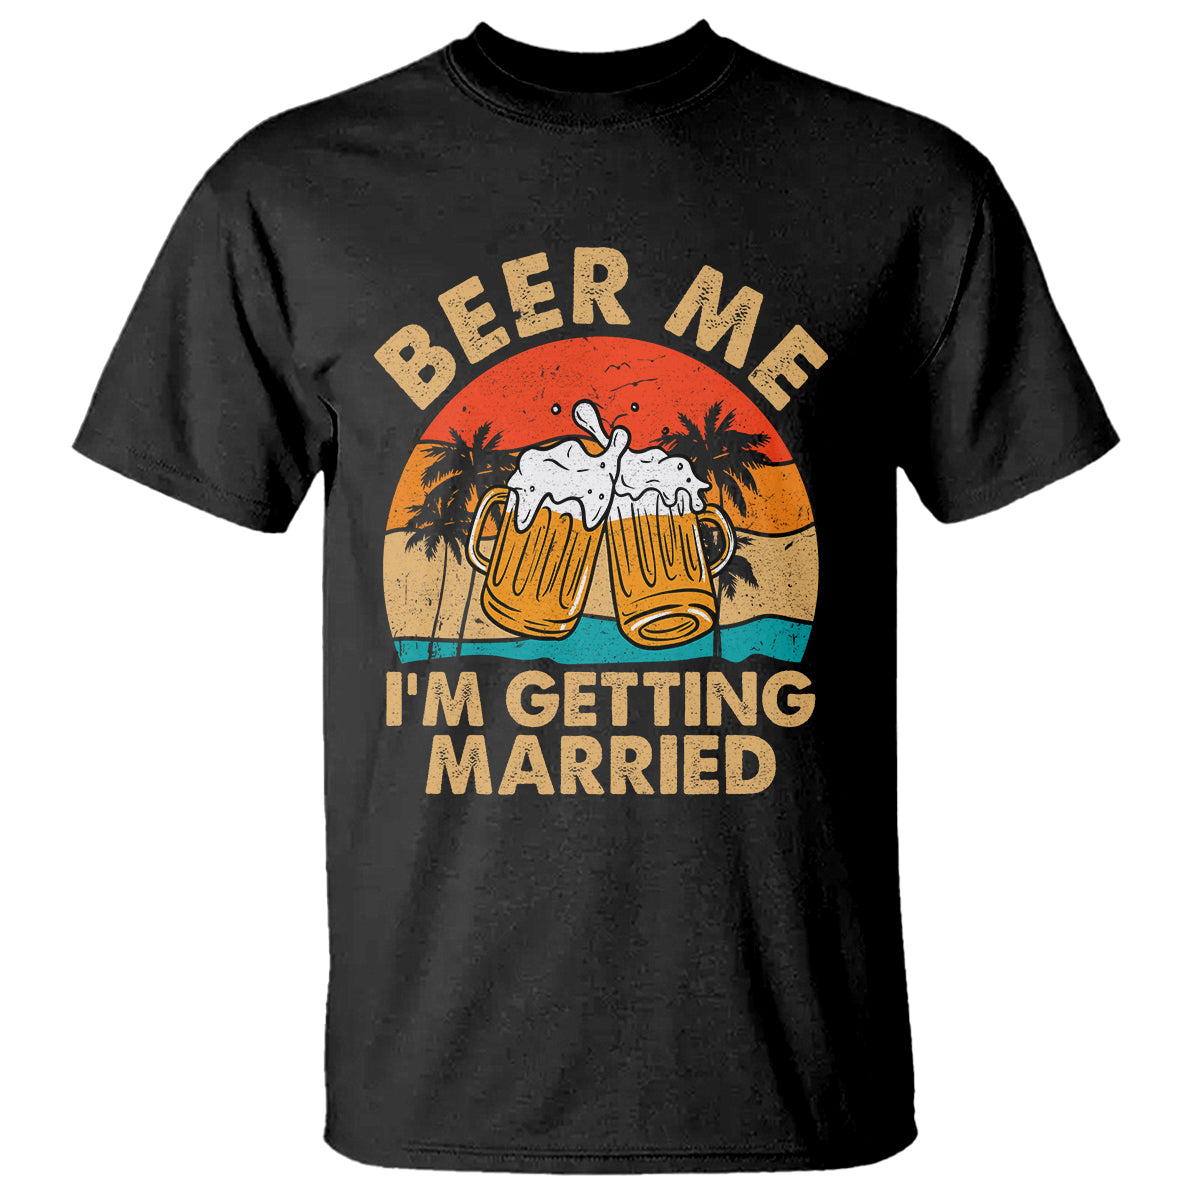 Bachelor Party T Shirt Beer Me I'm Getting Married TS02 Black Printyourwear